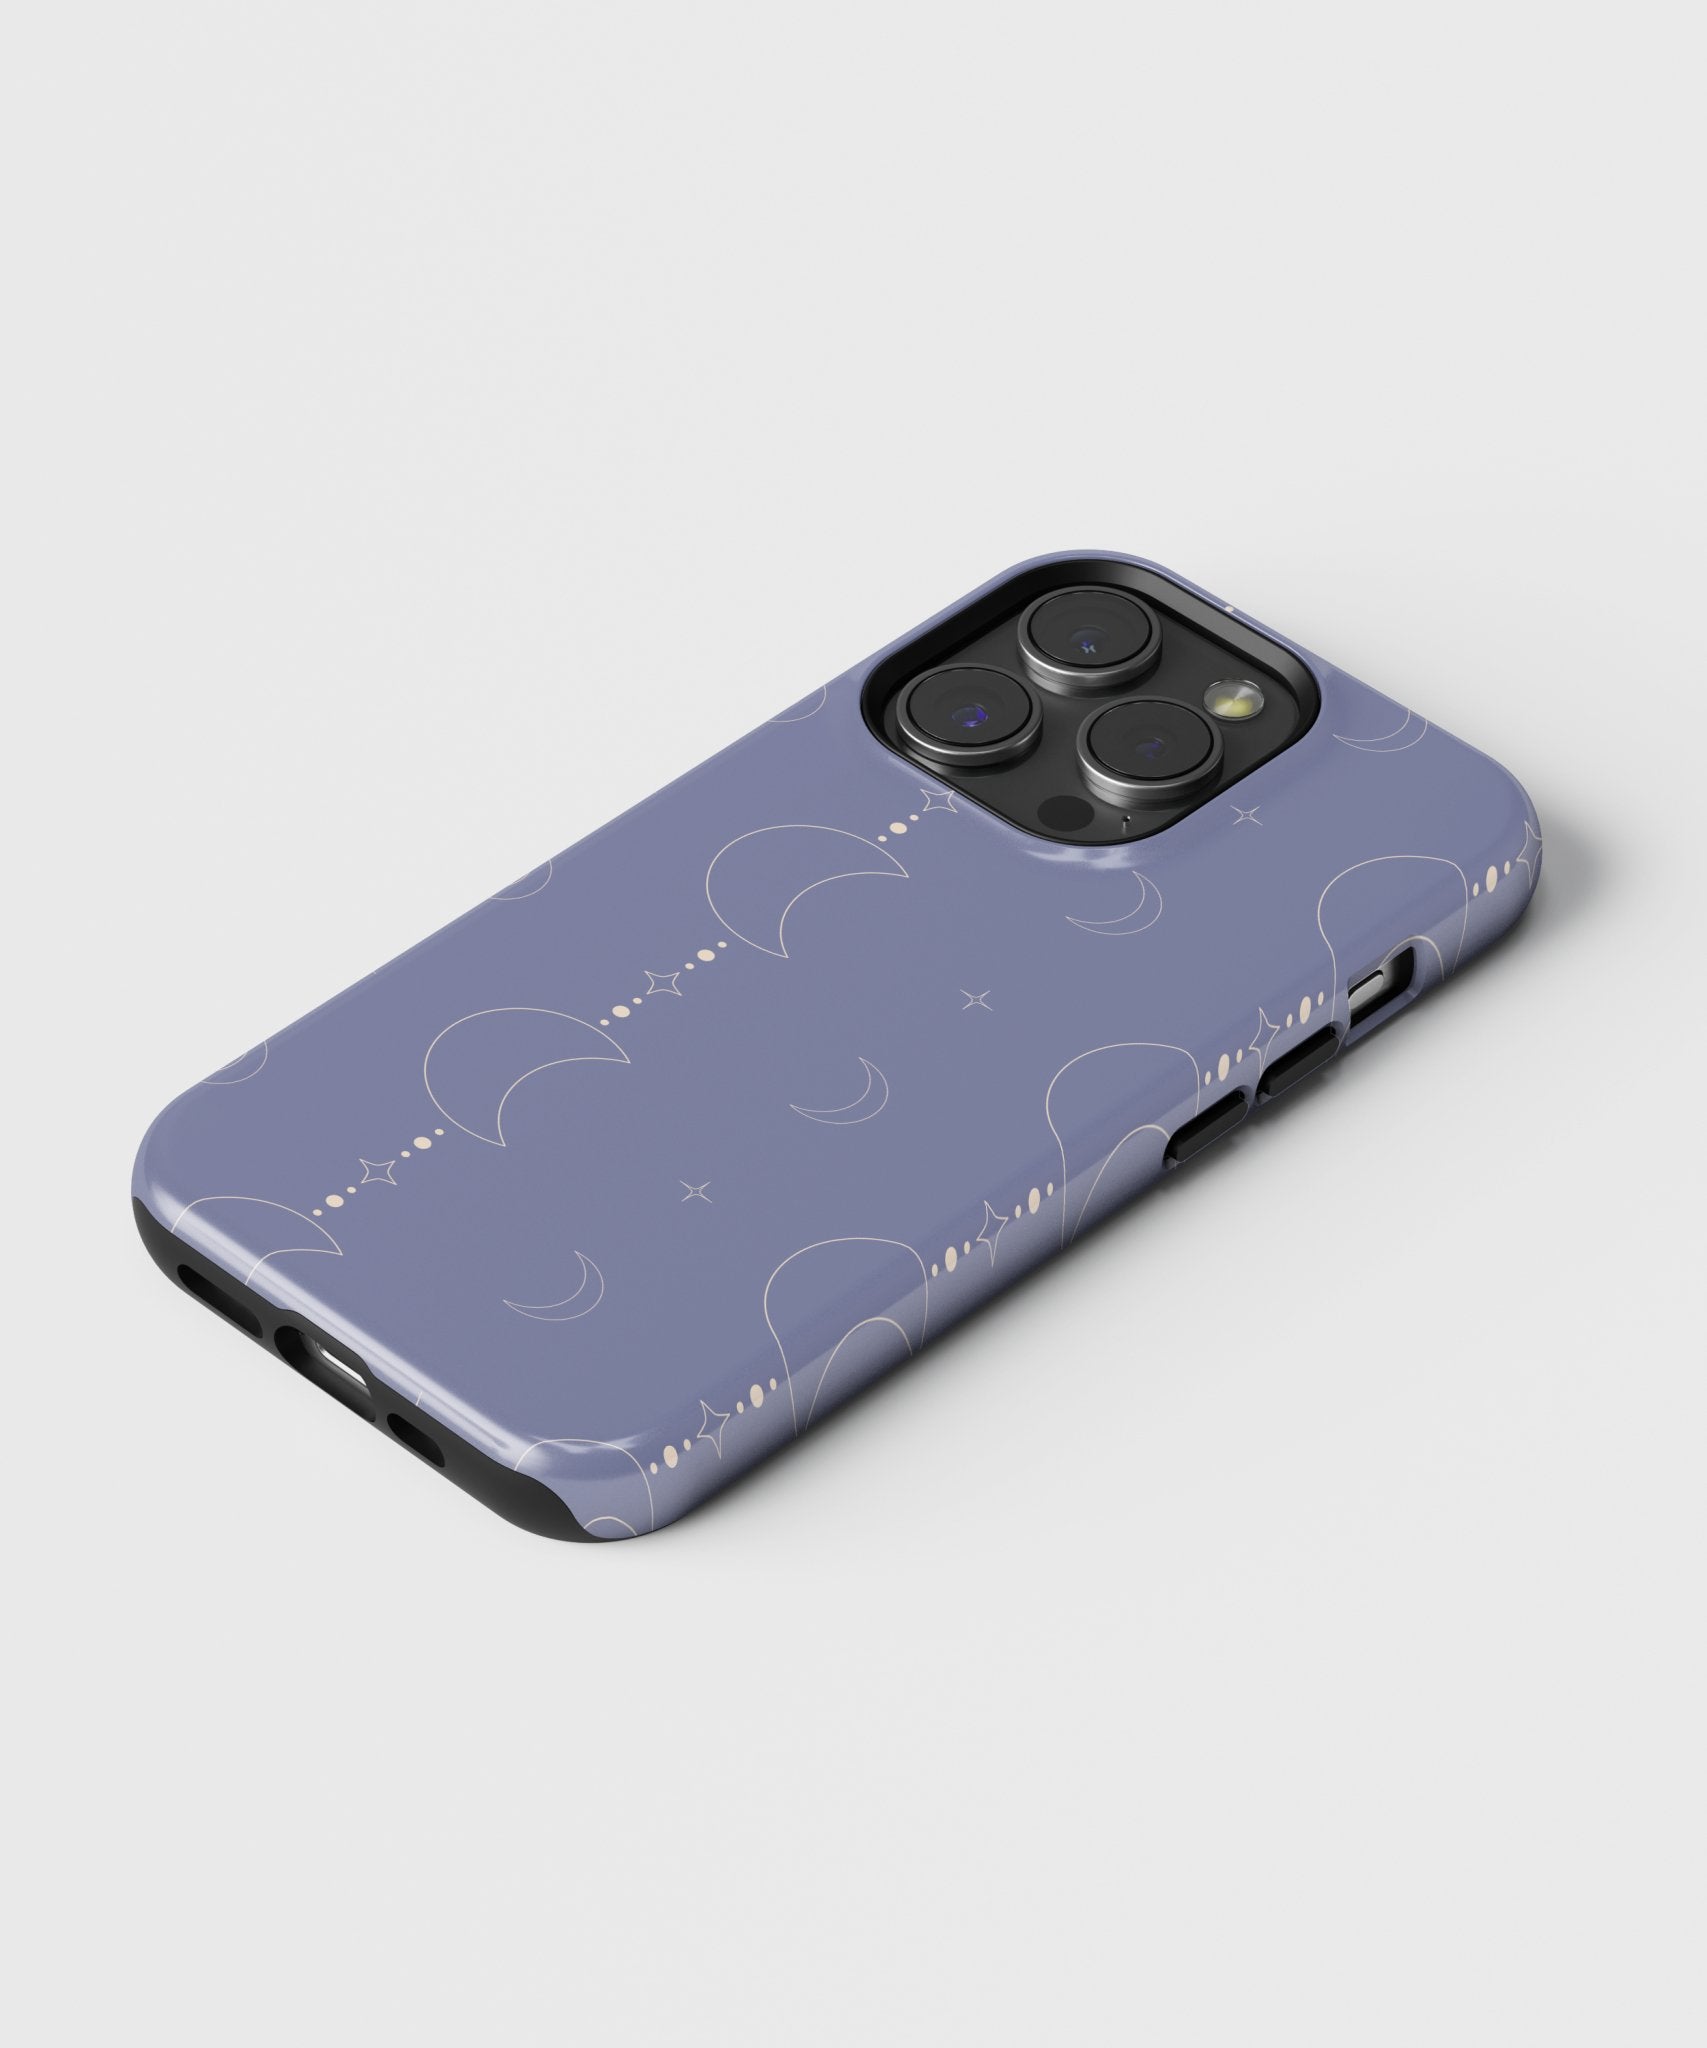 Chasing the Celestial Moonbeams - iPhone Tough case